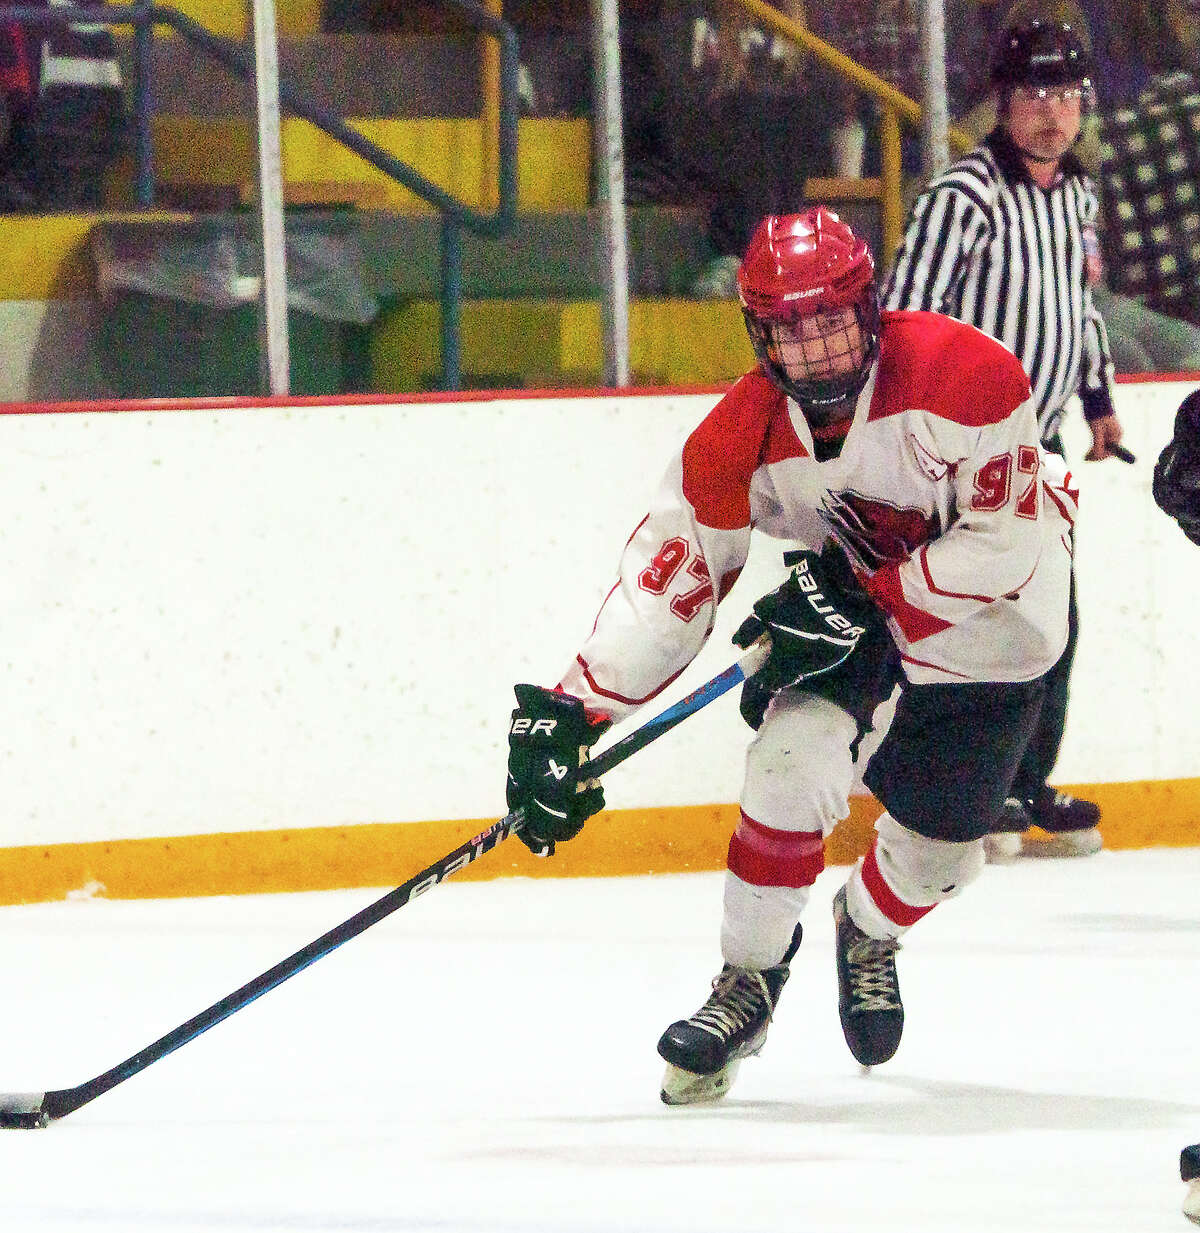 Colton Thompson of Alton scored a goal in his team's 3-3 tie with Vianney Tuesday in East Alton.